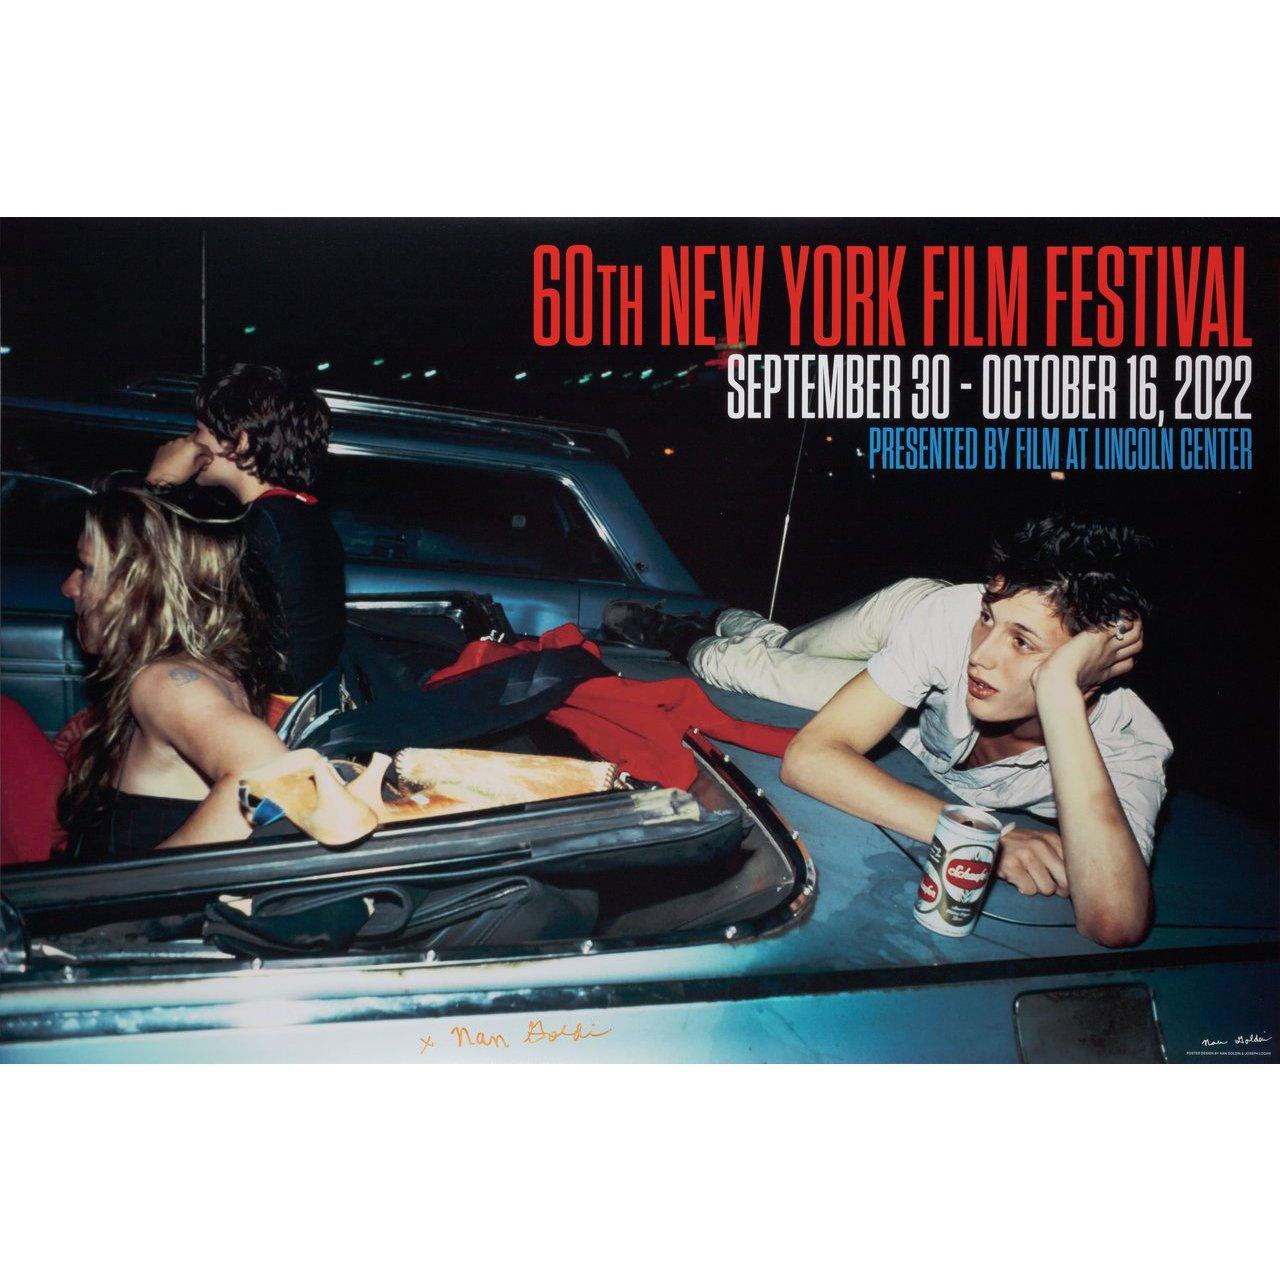 Original 2022 U.S. poster by Nan Goldin for the 1963 festival New York Film Festival. Signed by Nan Goldin. Fine condition, rolled. Please note: the size is stated in inches and the actual size can vary by an inch or more.





